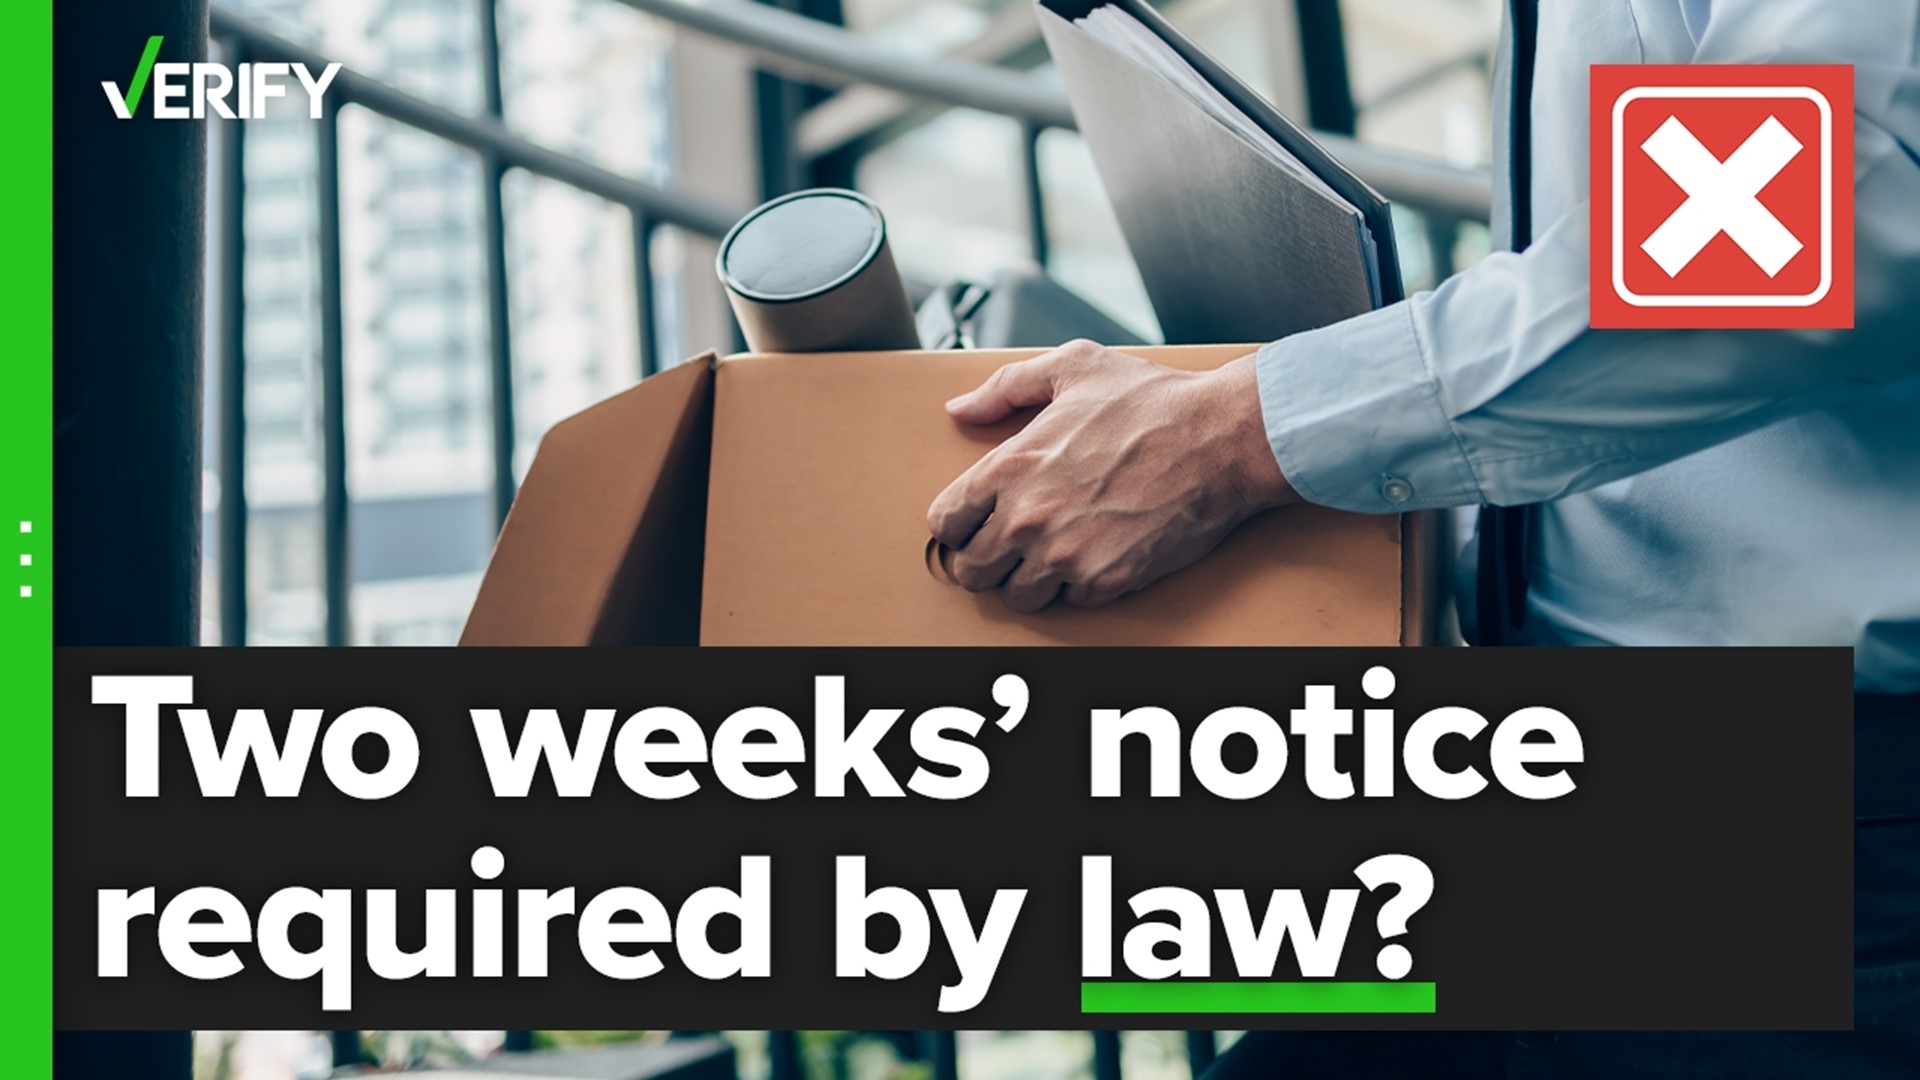 In most states, employers have to give their employees good cause before firing them. But employees can still quit their jobs at any time without two weeks’ notice.